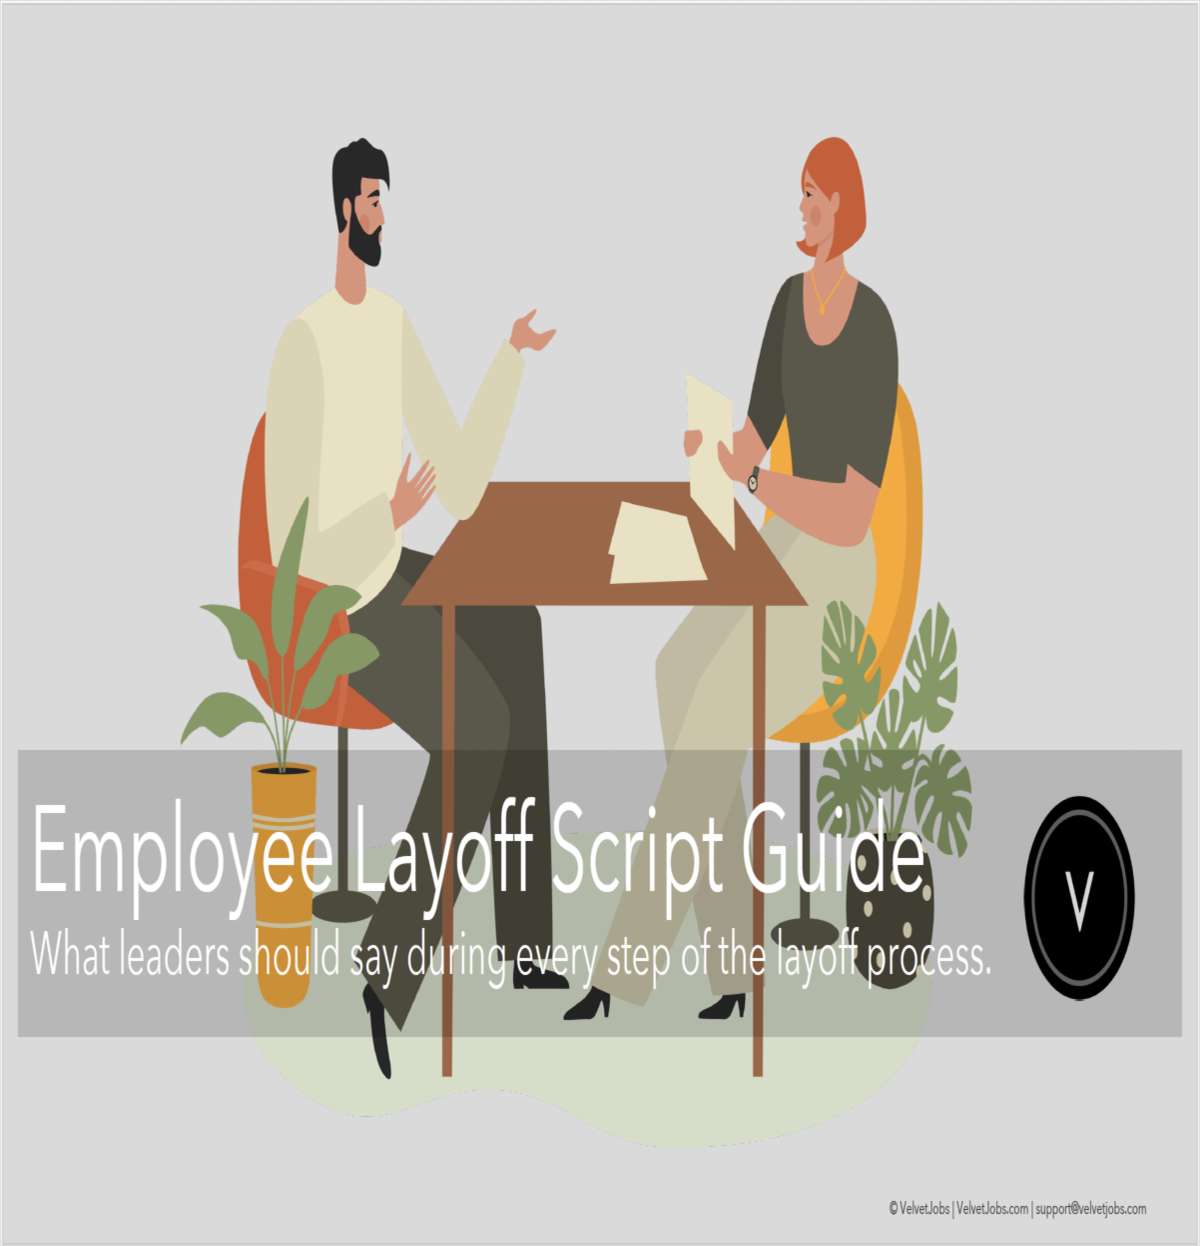 Layoff Script Guide by VelvetJobs - What to Say and What Not to Say During Layoffs